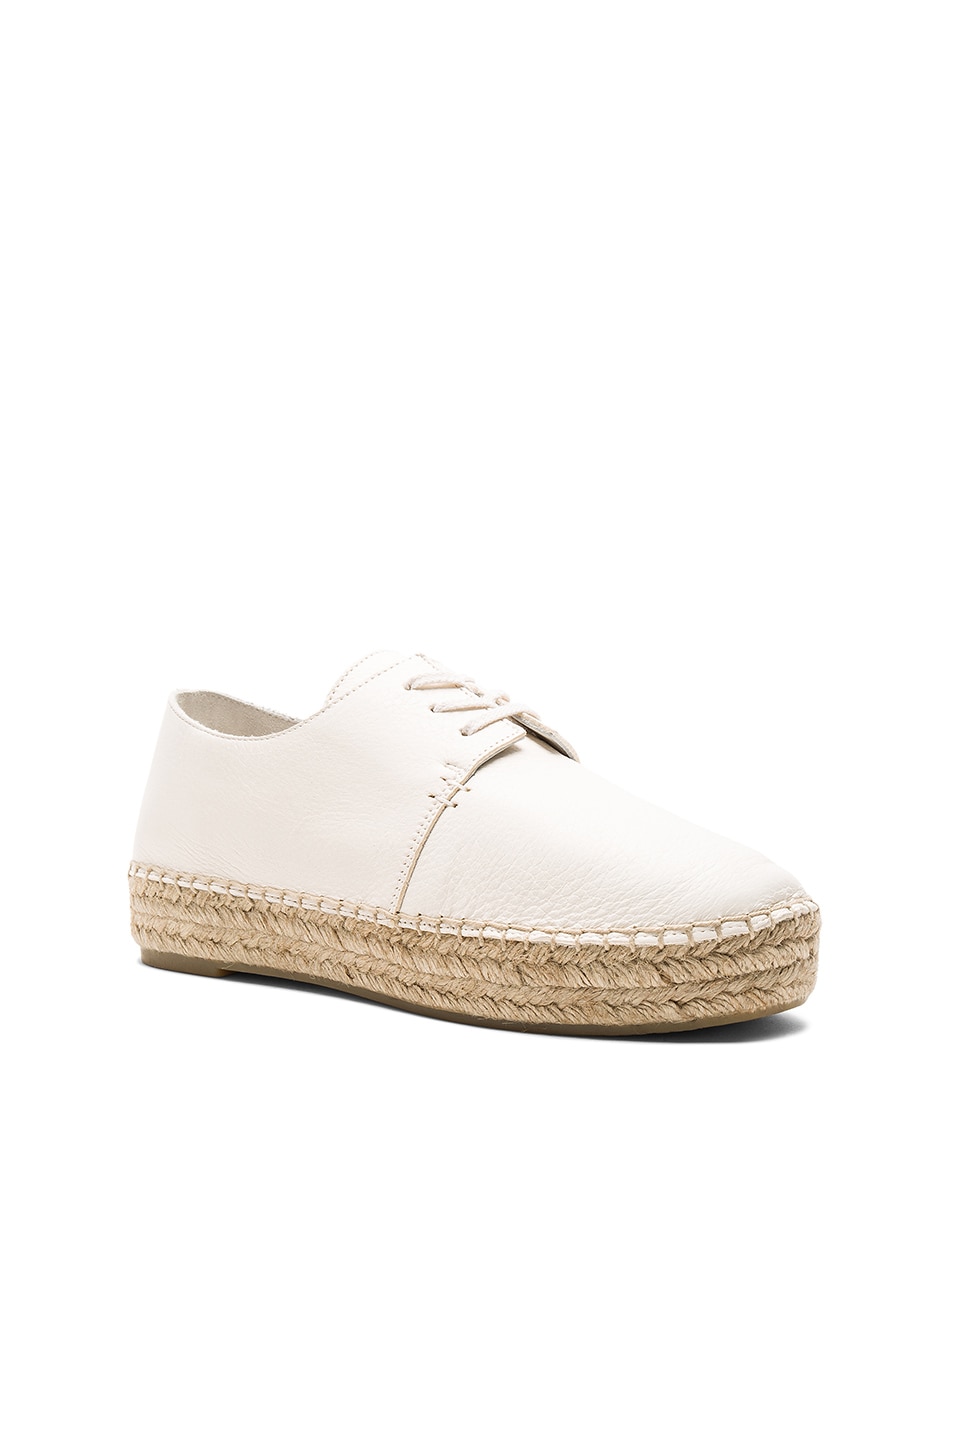 VINCE Cynthia Leather Lace Up Espadrille Platform Oxfords in Cream ...